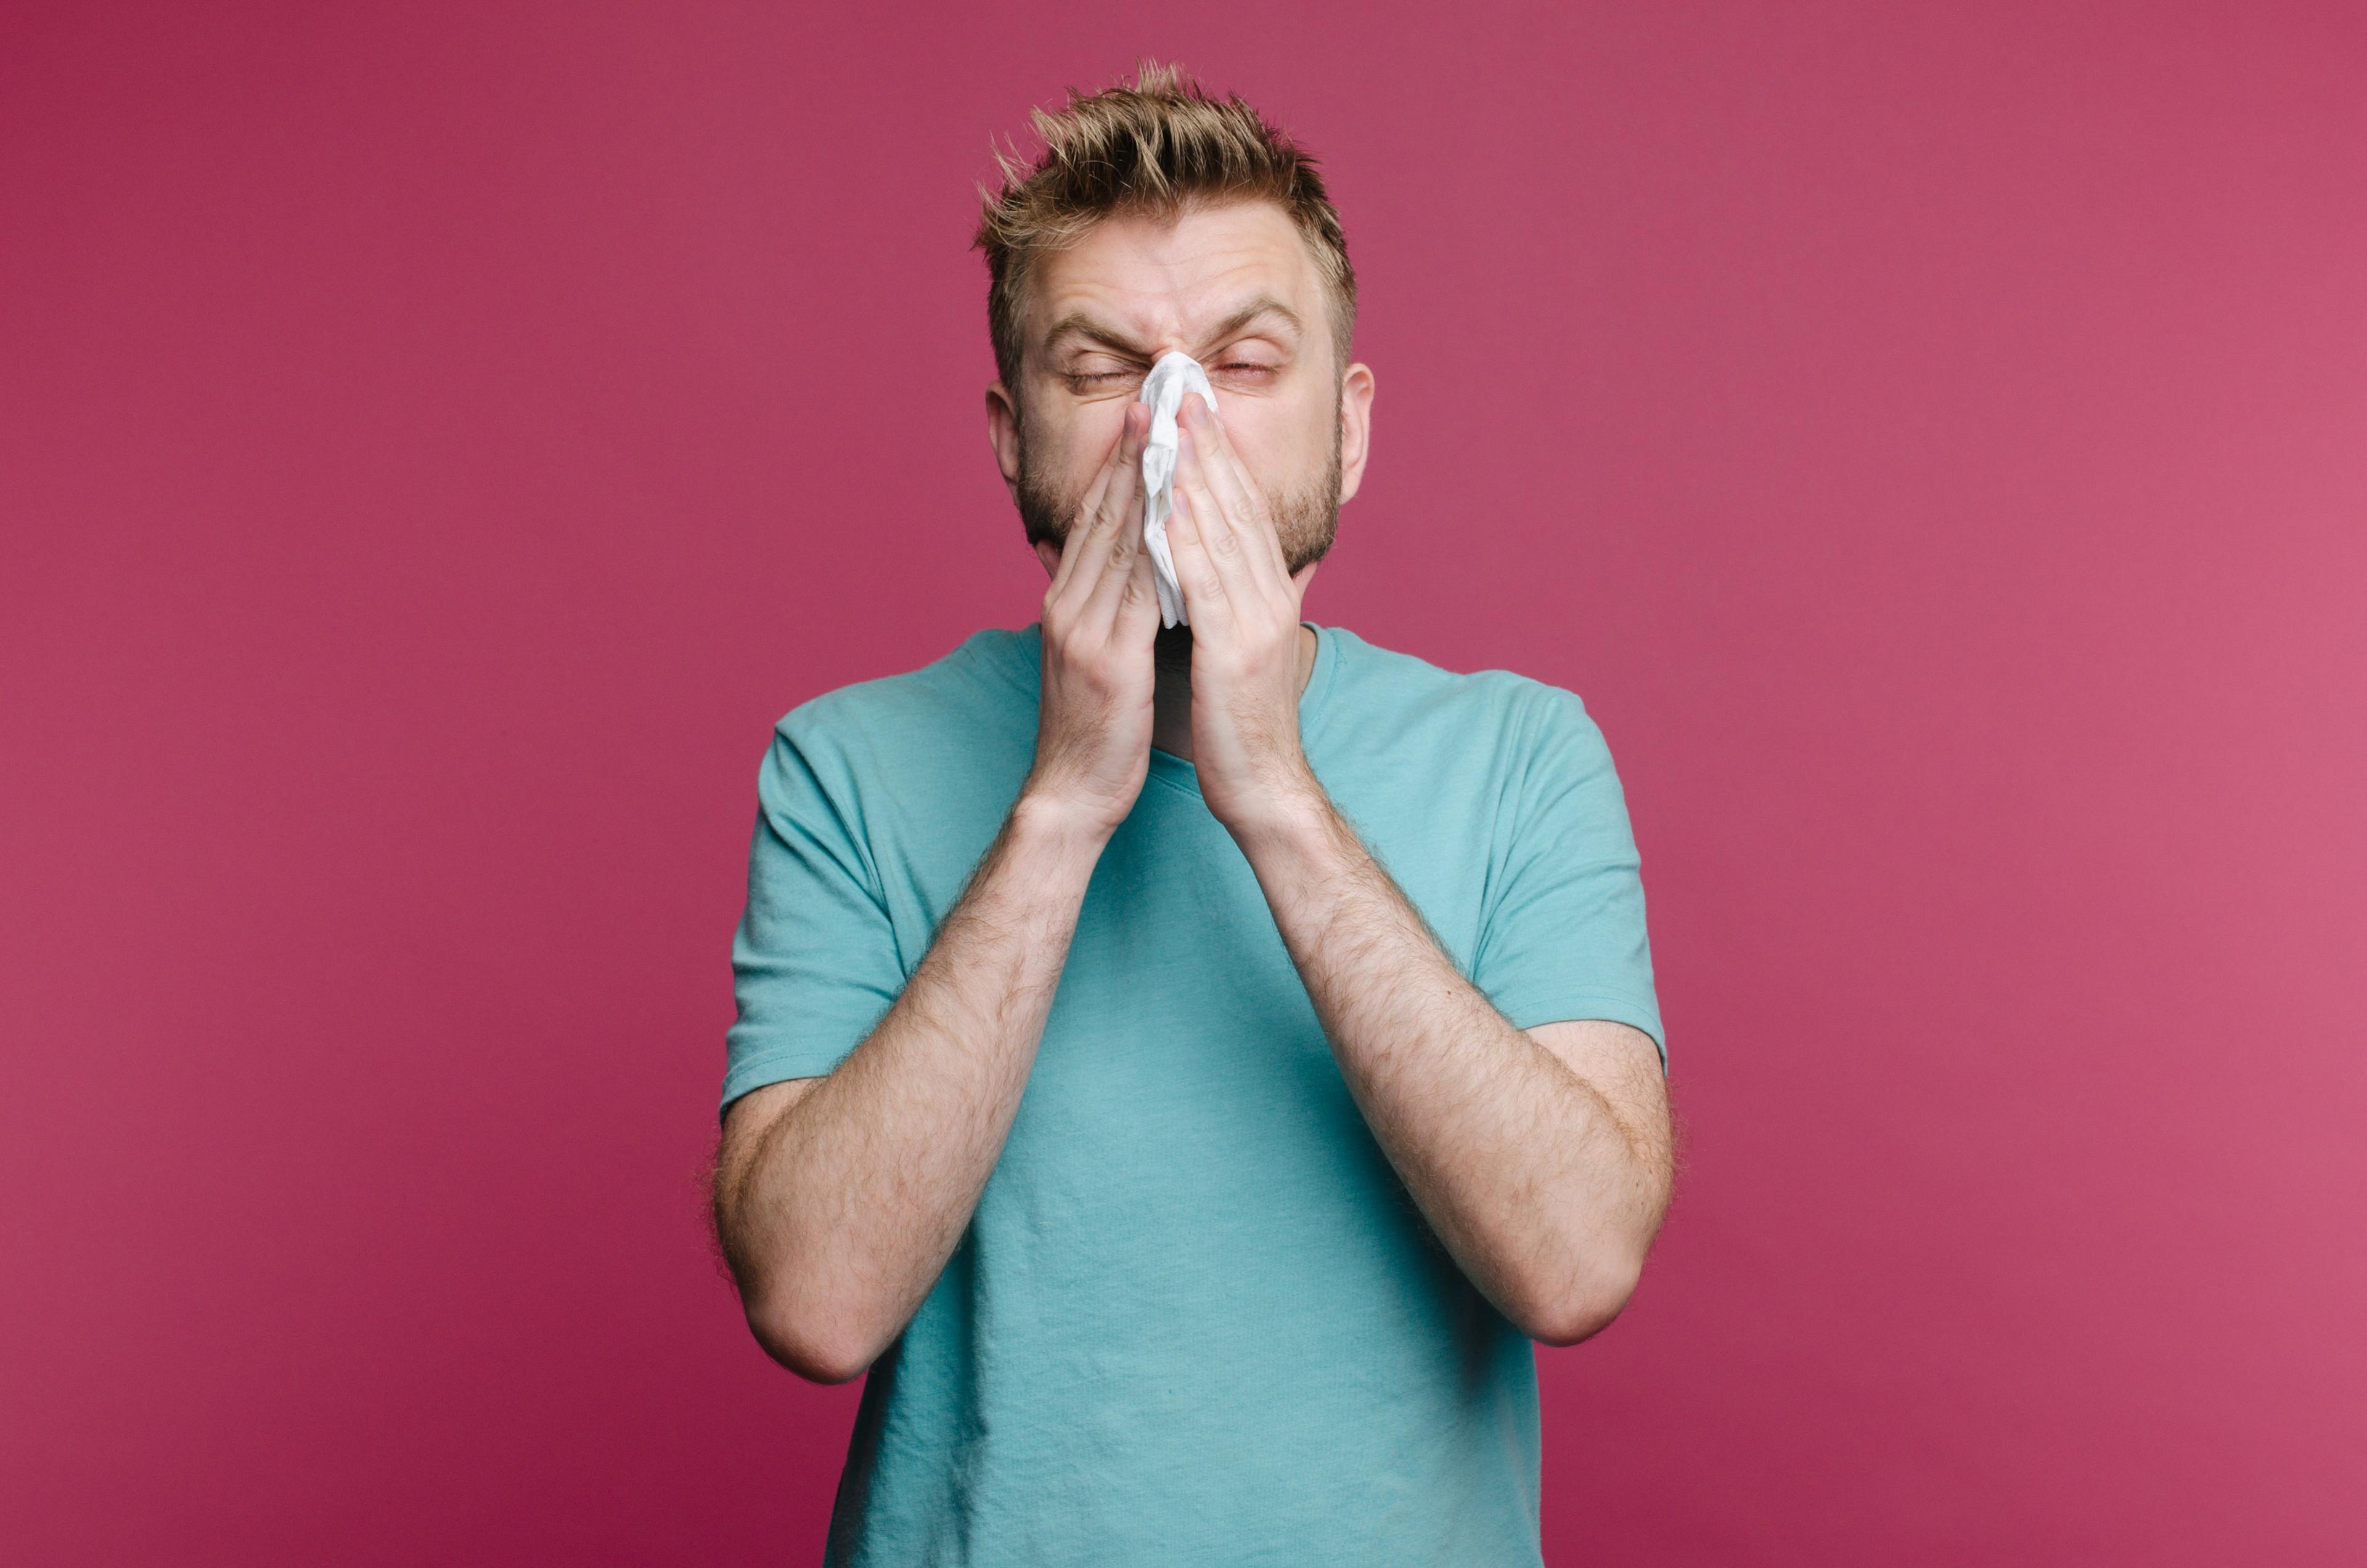 Common Cold or Swine Flu Symptoms? Learn About This Decade-Old Pandemic